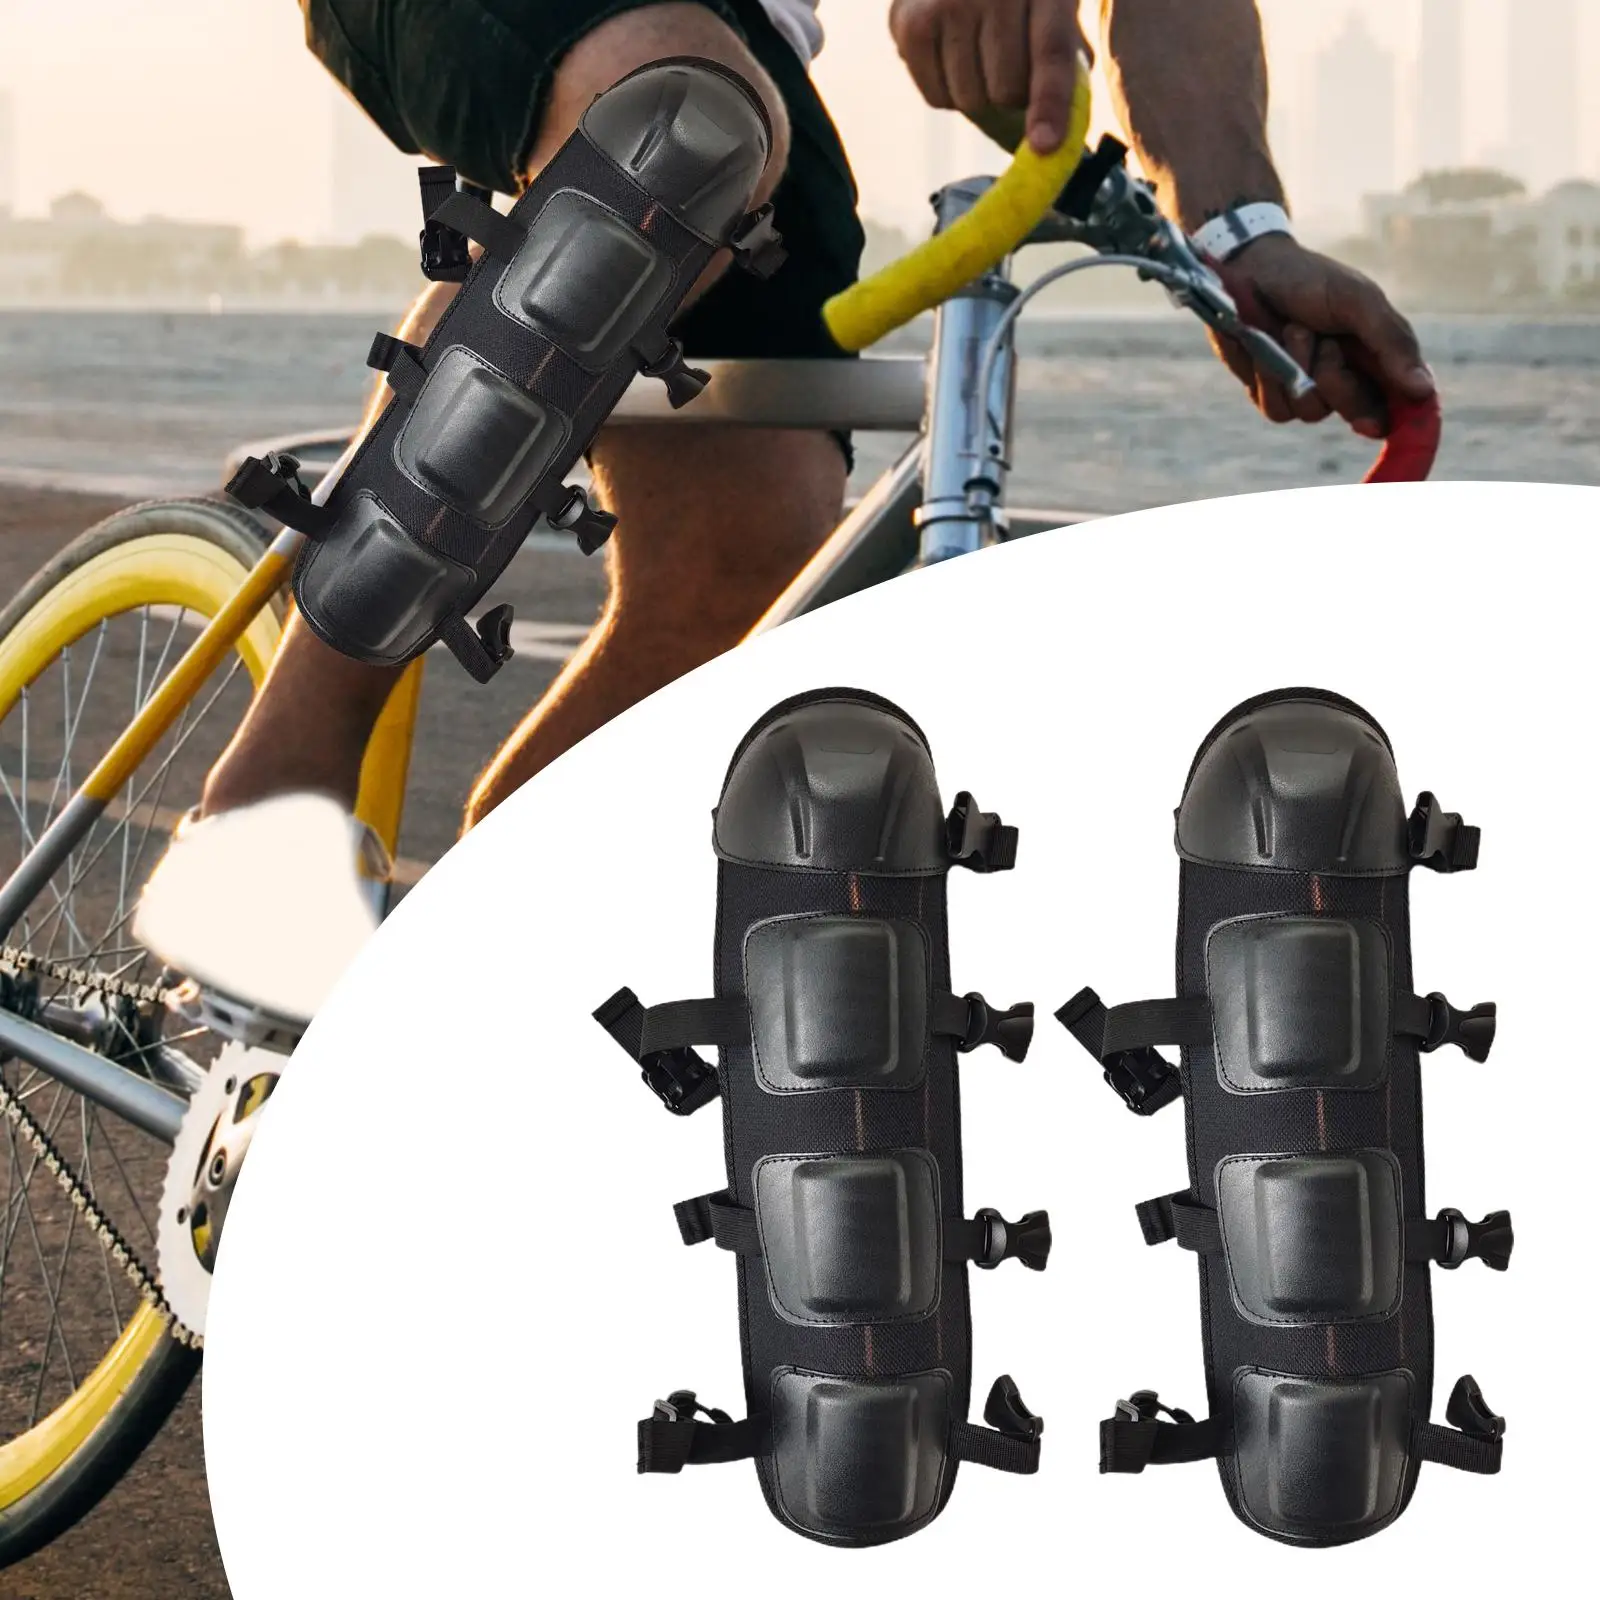 Knee Pads Motorcycle Knee Shin Guards Kneelet Protective Gear Adjustable Straps